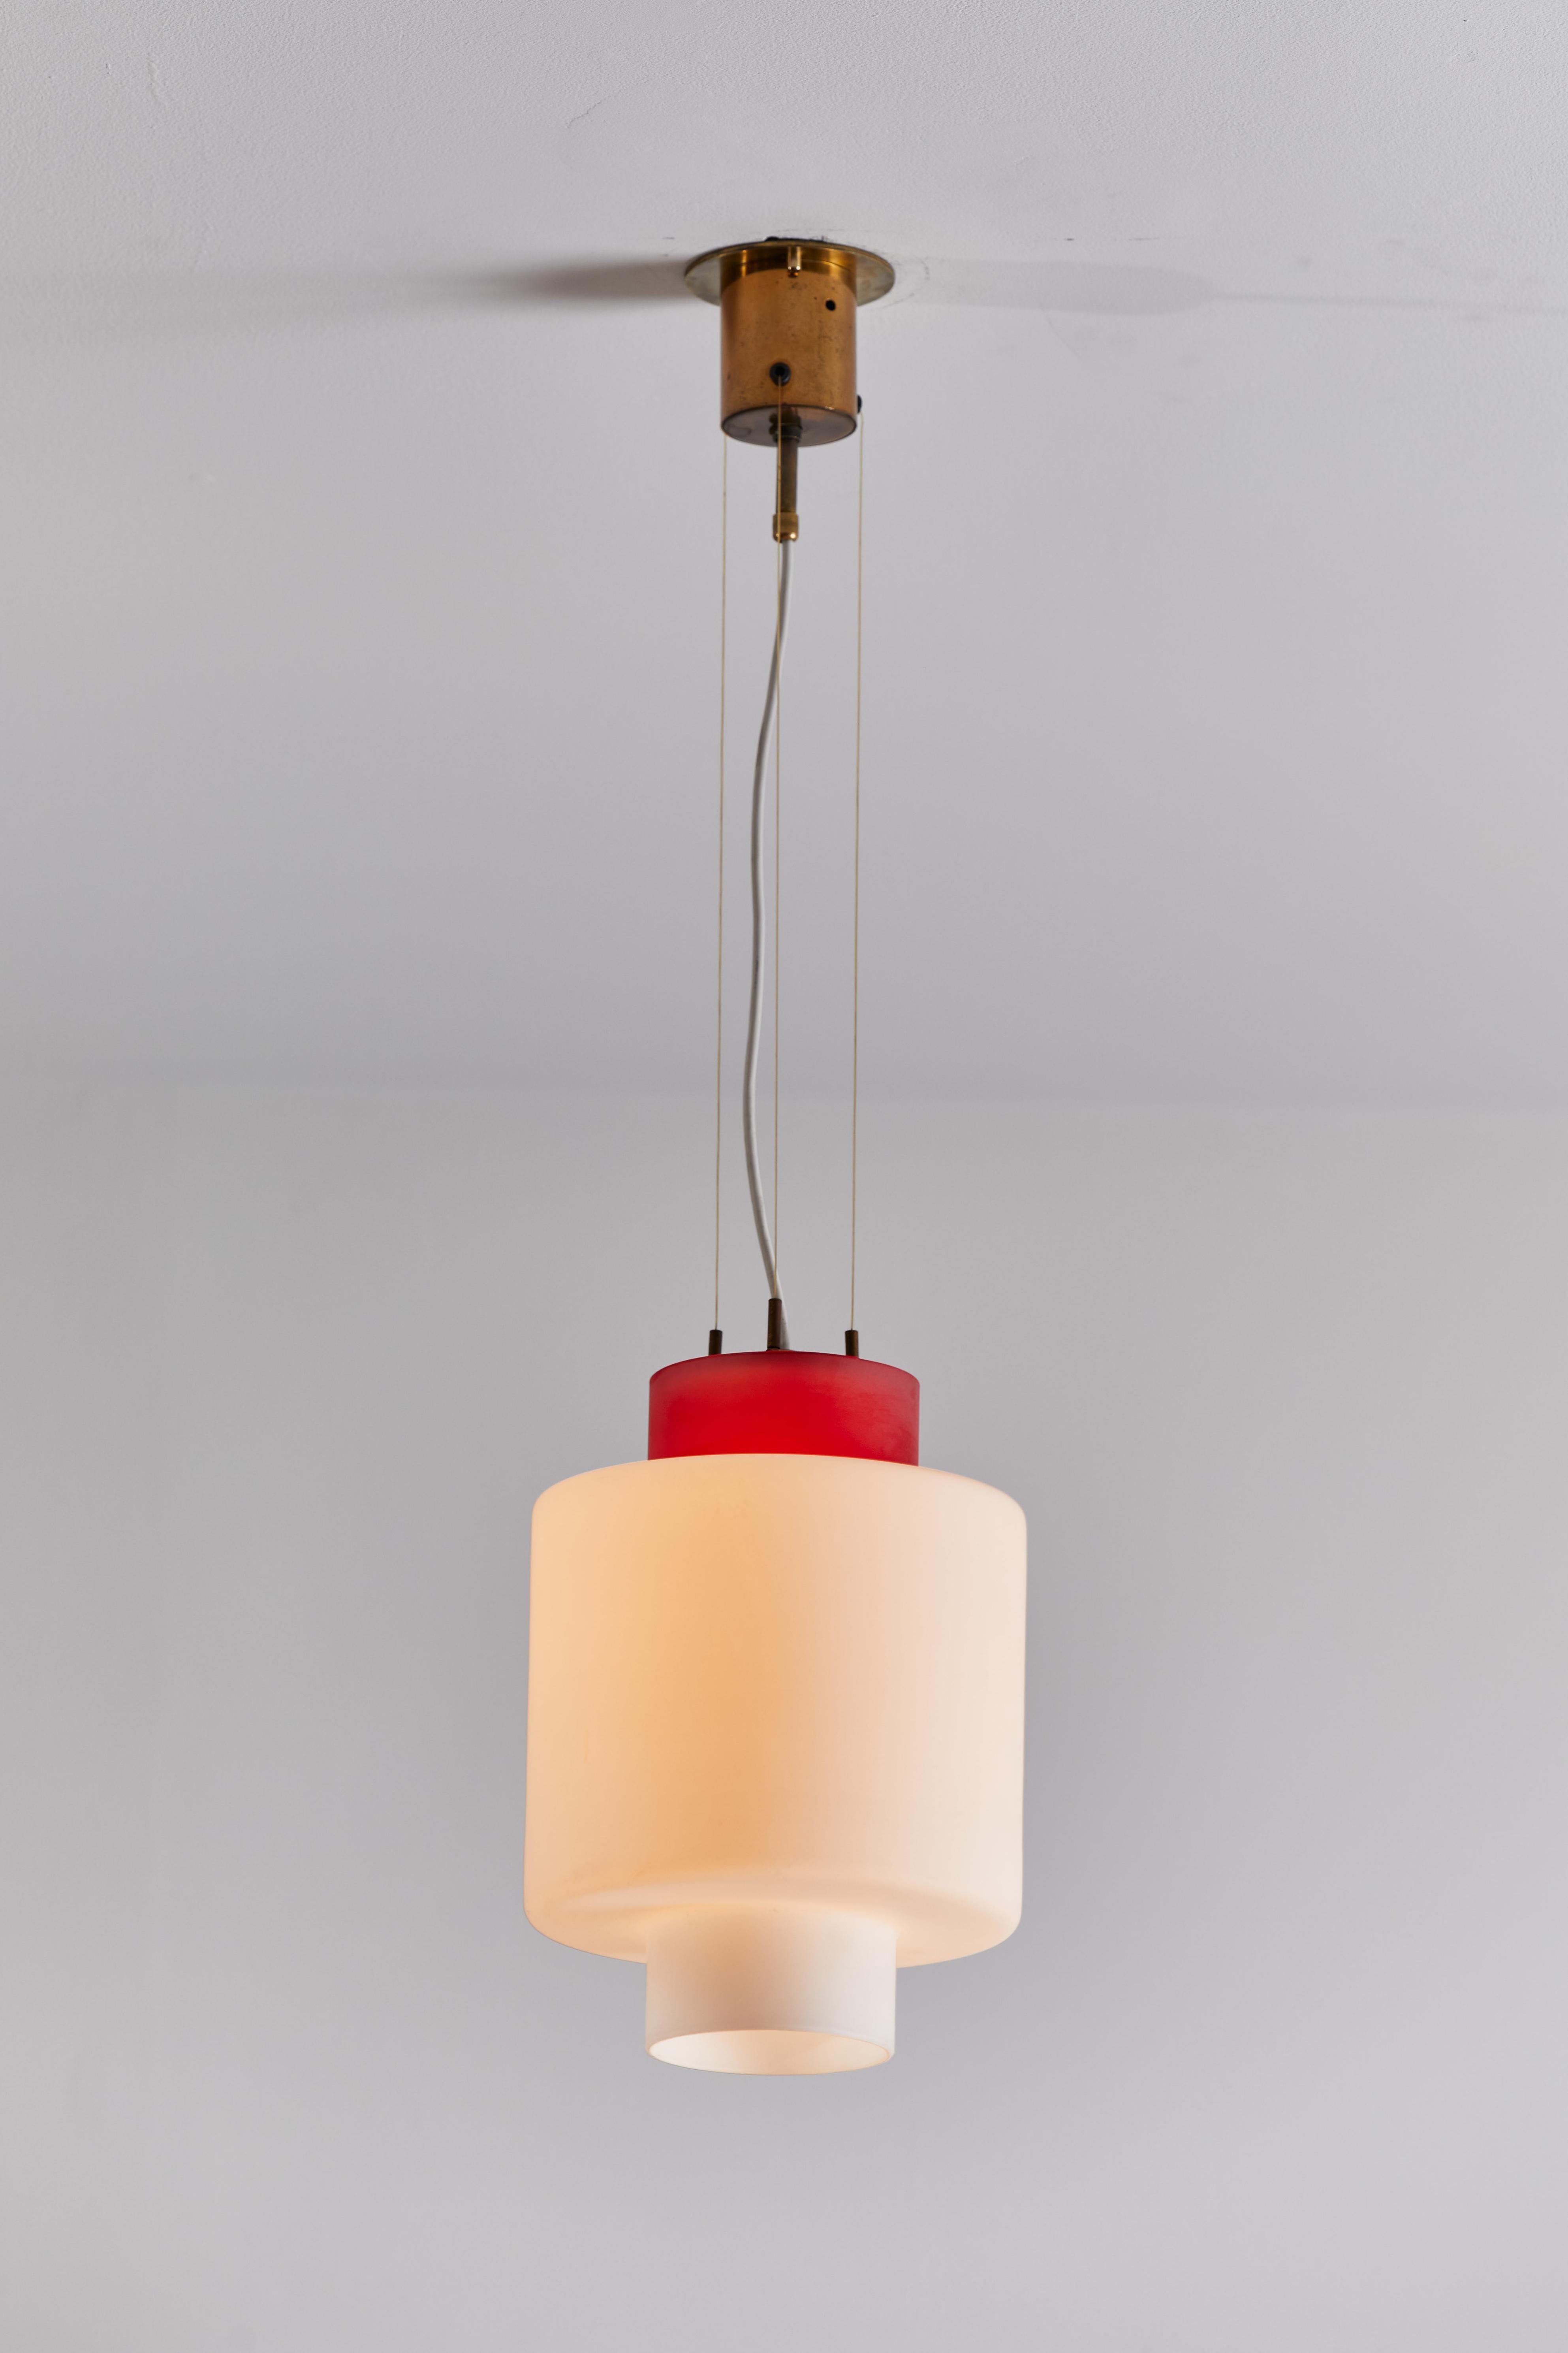 Two pendants by Stilnovo. Manufactured in Italy, circa 1950s. Brushed satin glass diffuser. Brass hardware. Rewired for U.S. standards. Original canopies, custom brass ceiling plates. From the model 8052 series of lights. We recommend one E27 100w